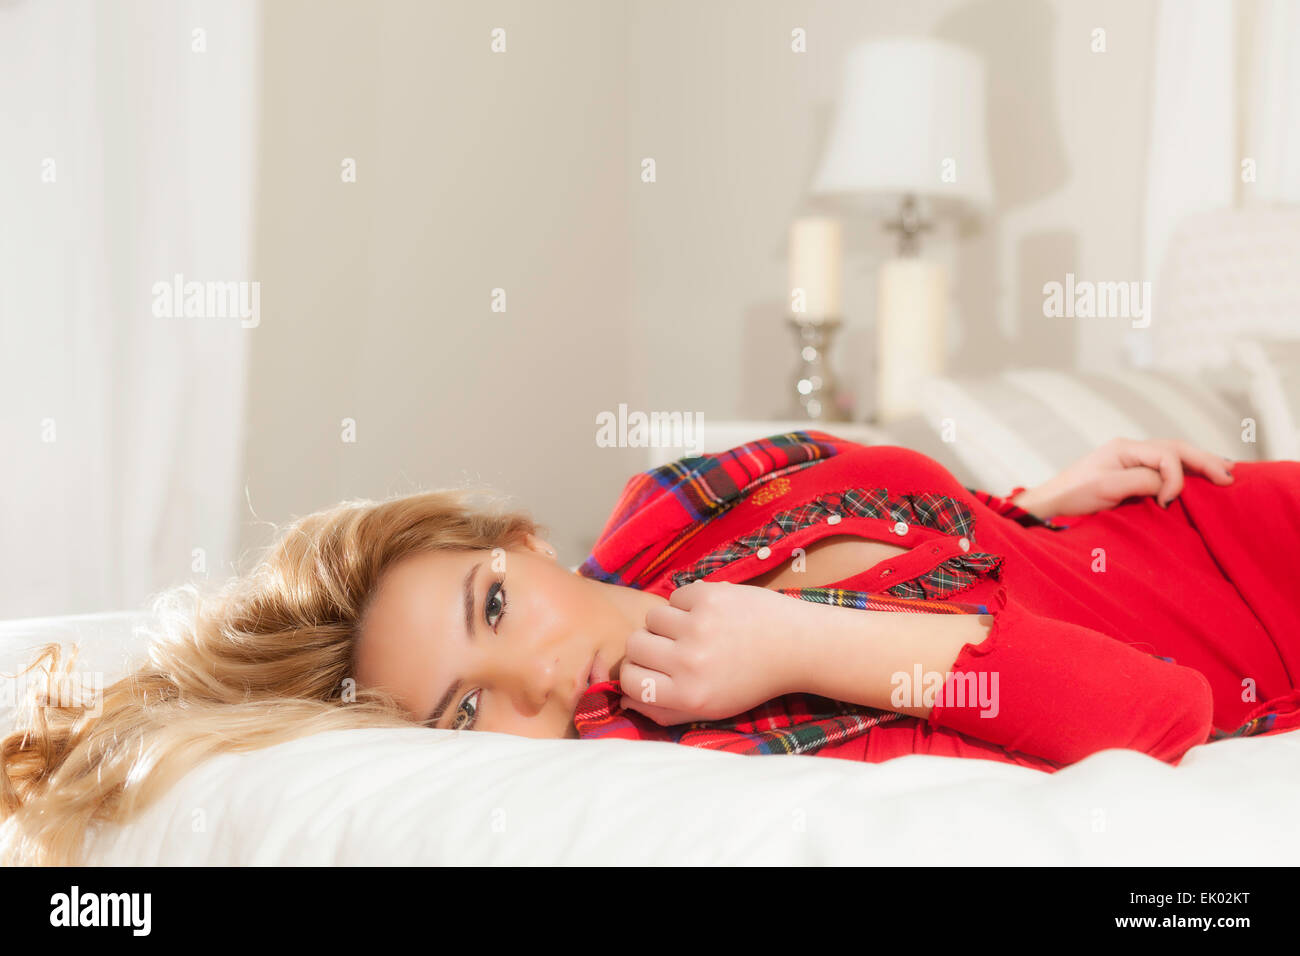 A pretty Latina blonde girl in red Christmas clothes laying on a white bed with a lamp in the background. Stock Photo